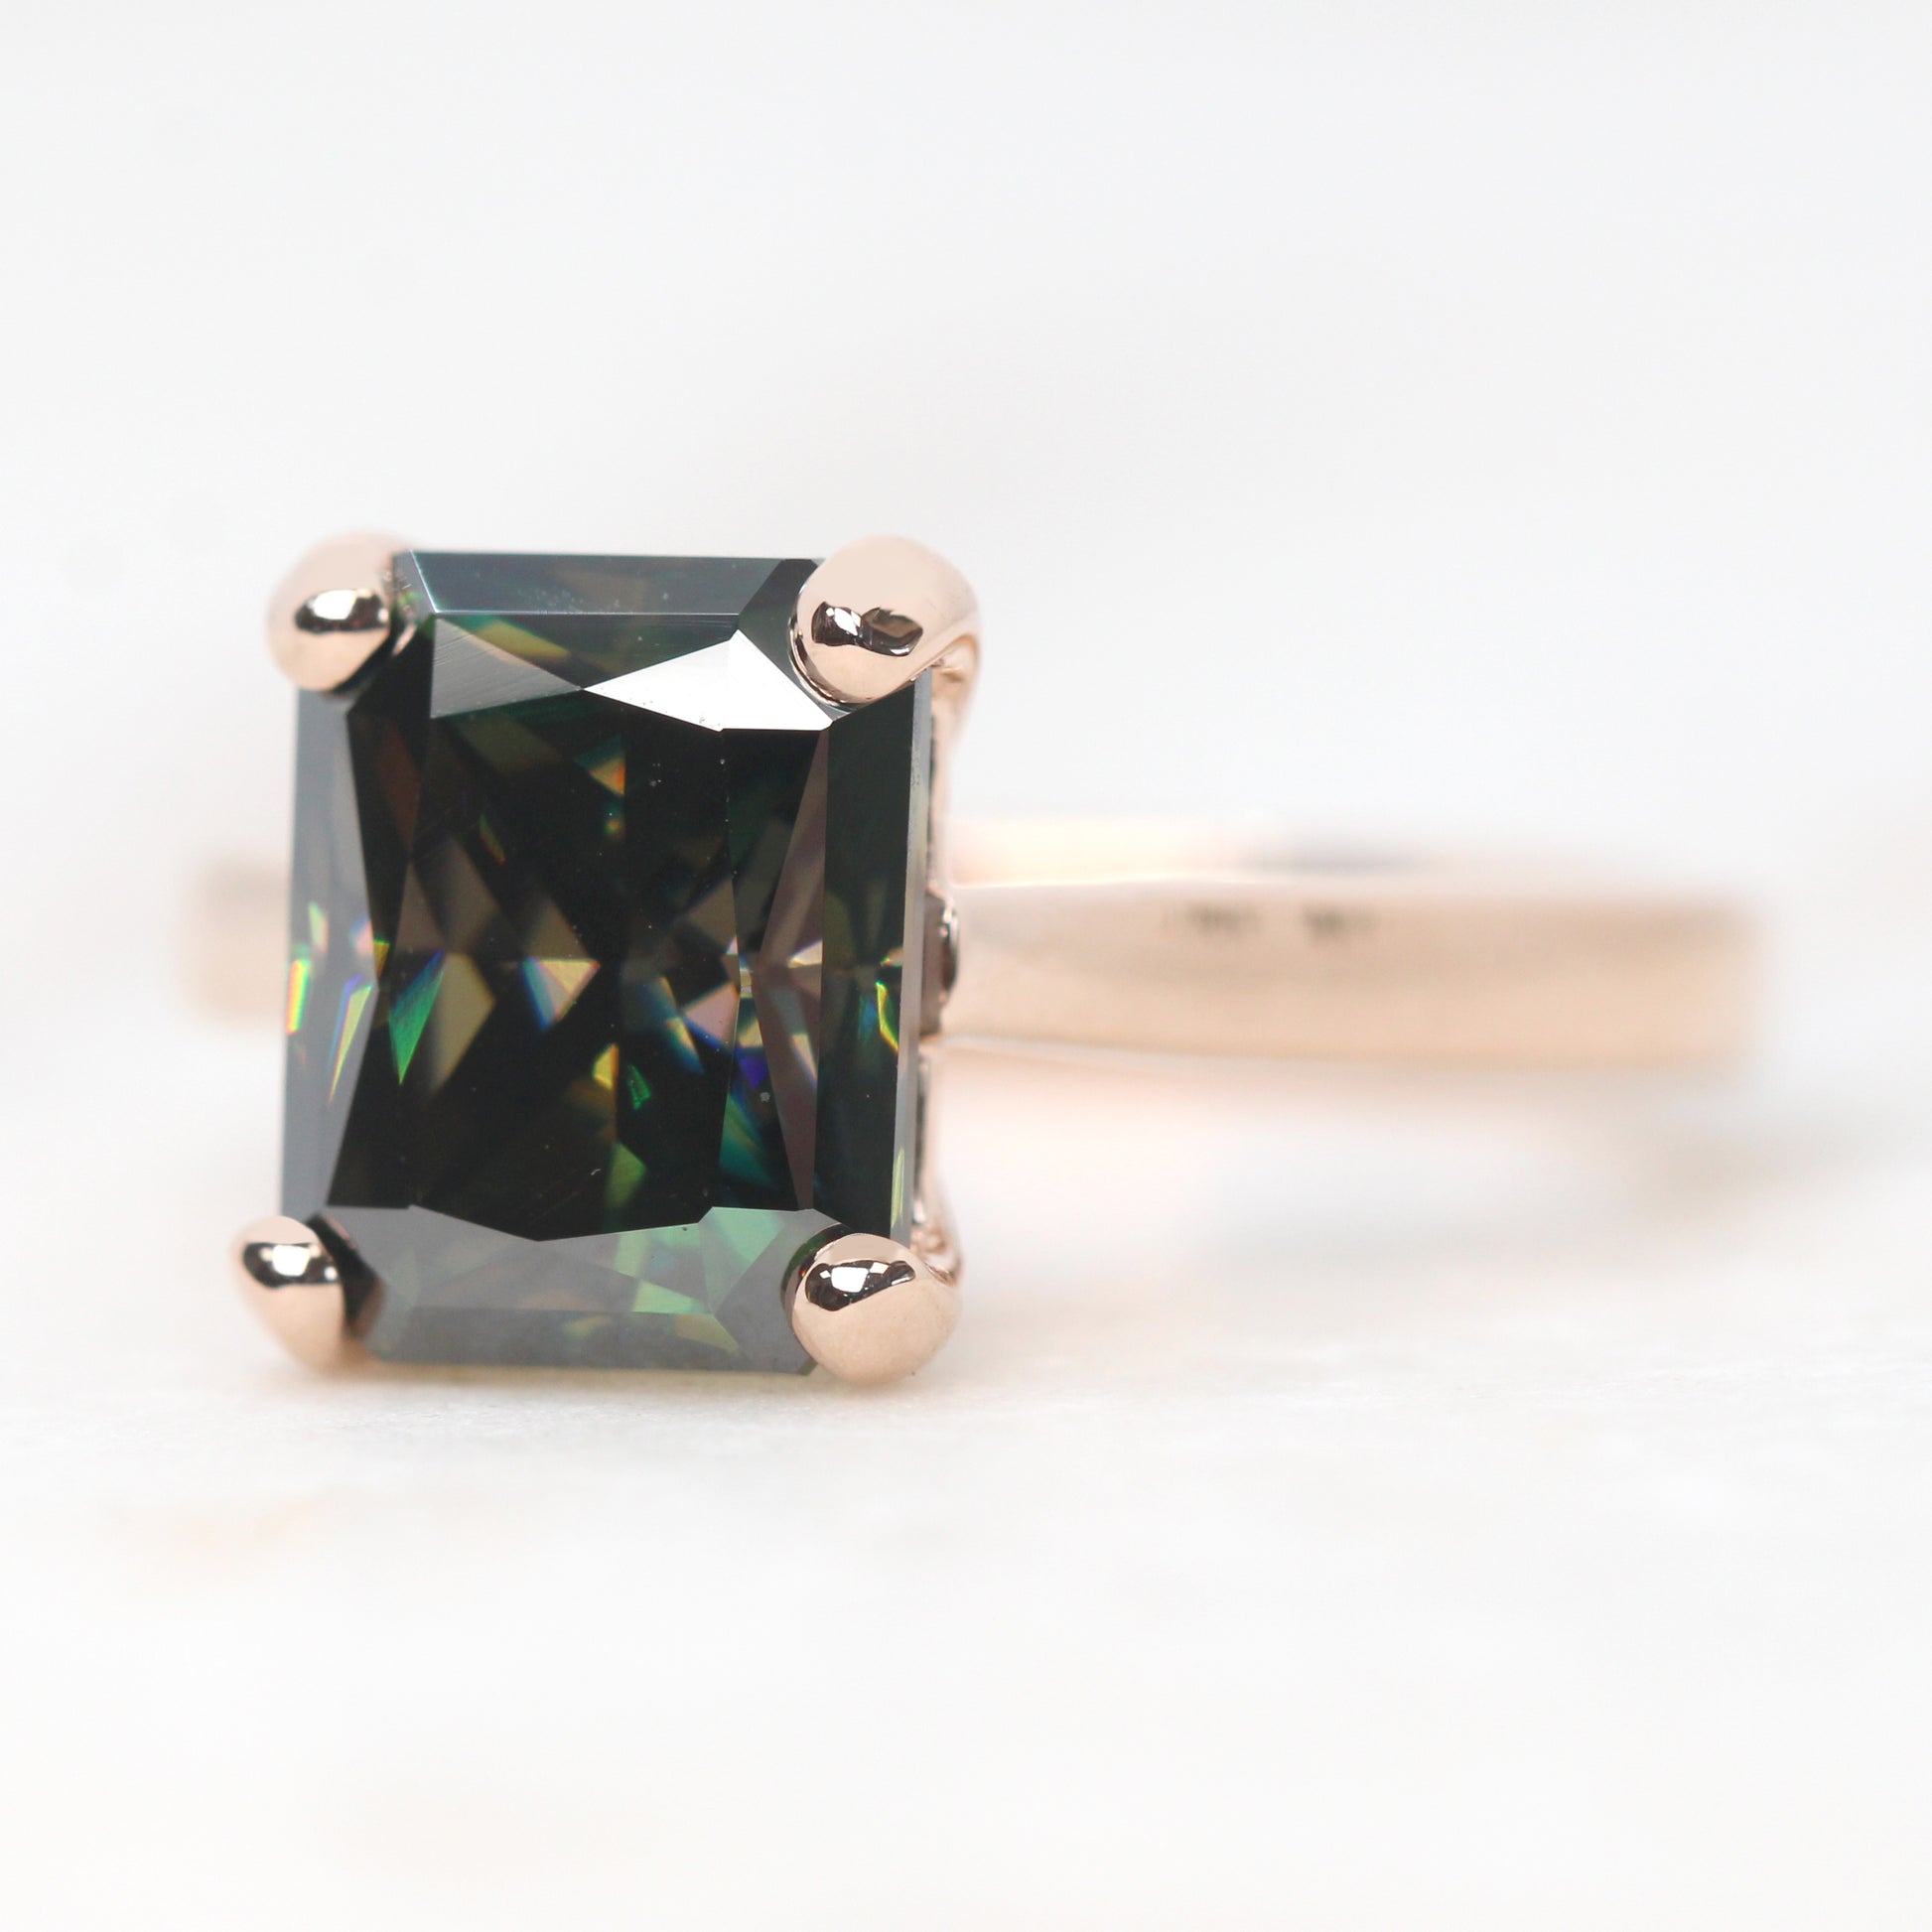 Lexi Ring with a 4.00 Carat Emerald Cut Black and Teal Moissanite in 14k Rose Gold - Ready to Size and Ship - Midwinter Co. Alternative Bridal Rings and Modern Fine Jewelry